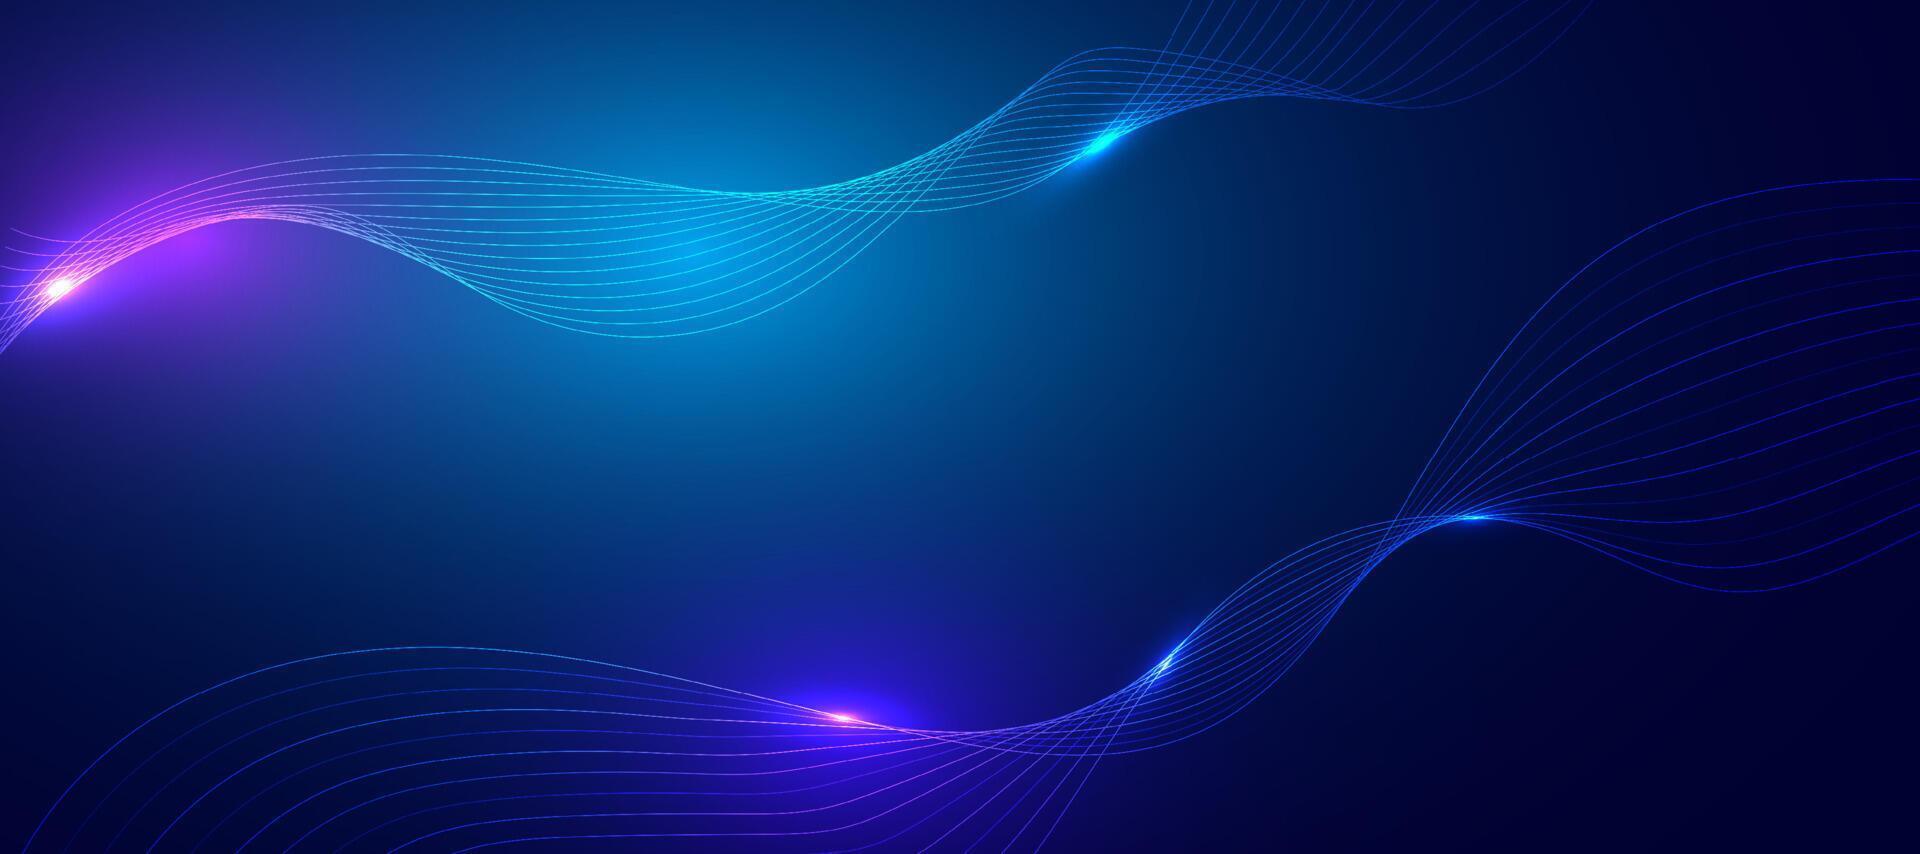 Abstract blue background with flowing lines. vector